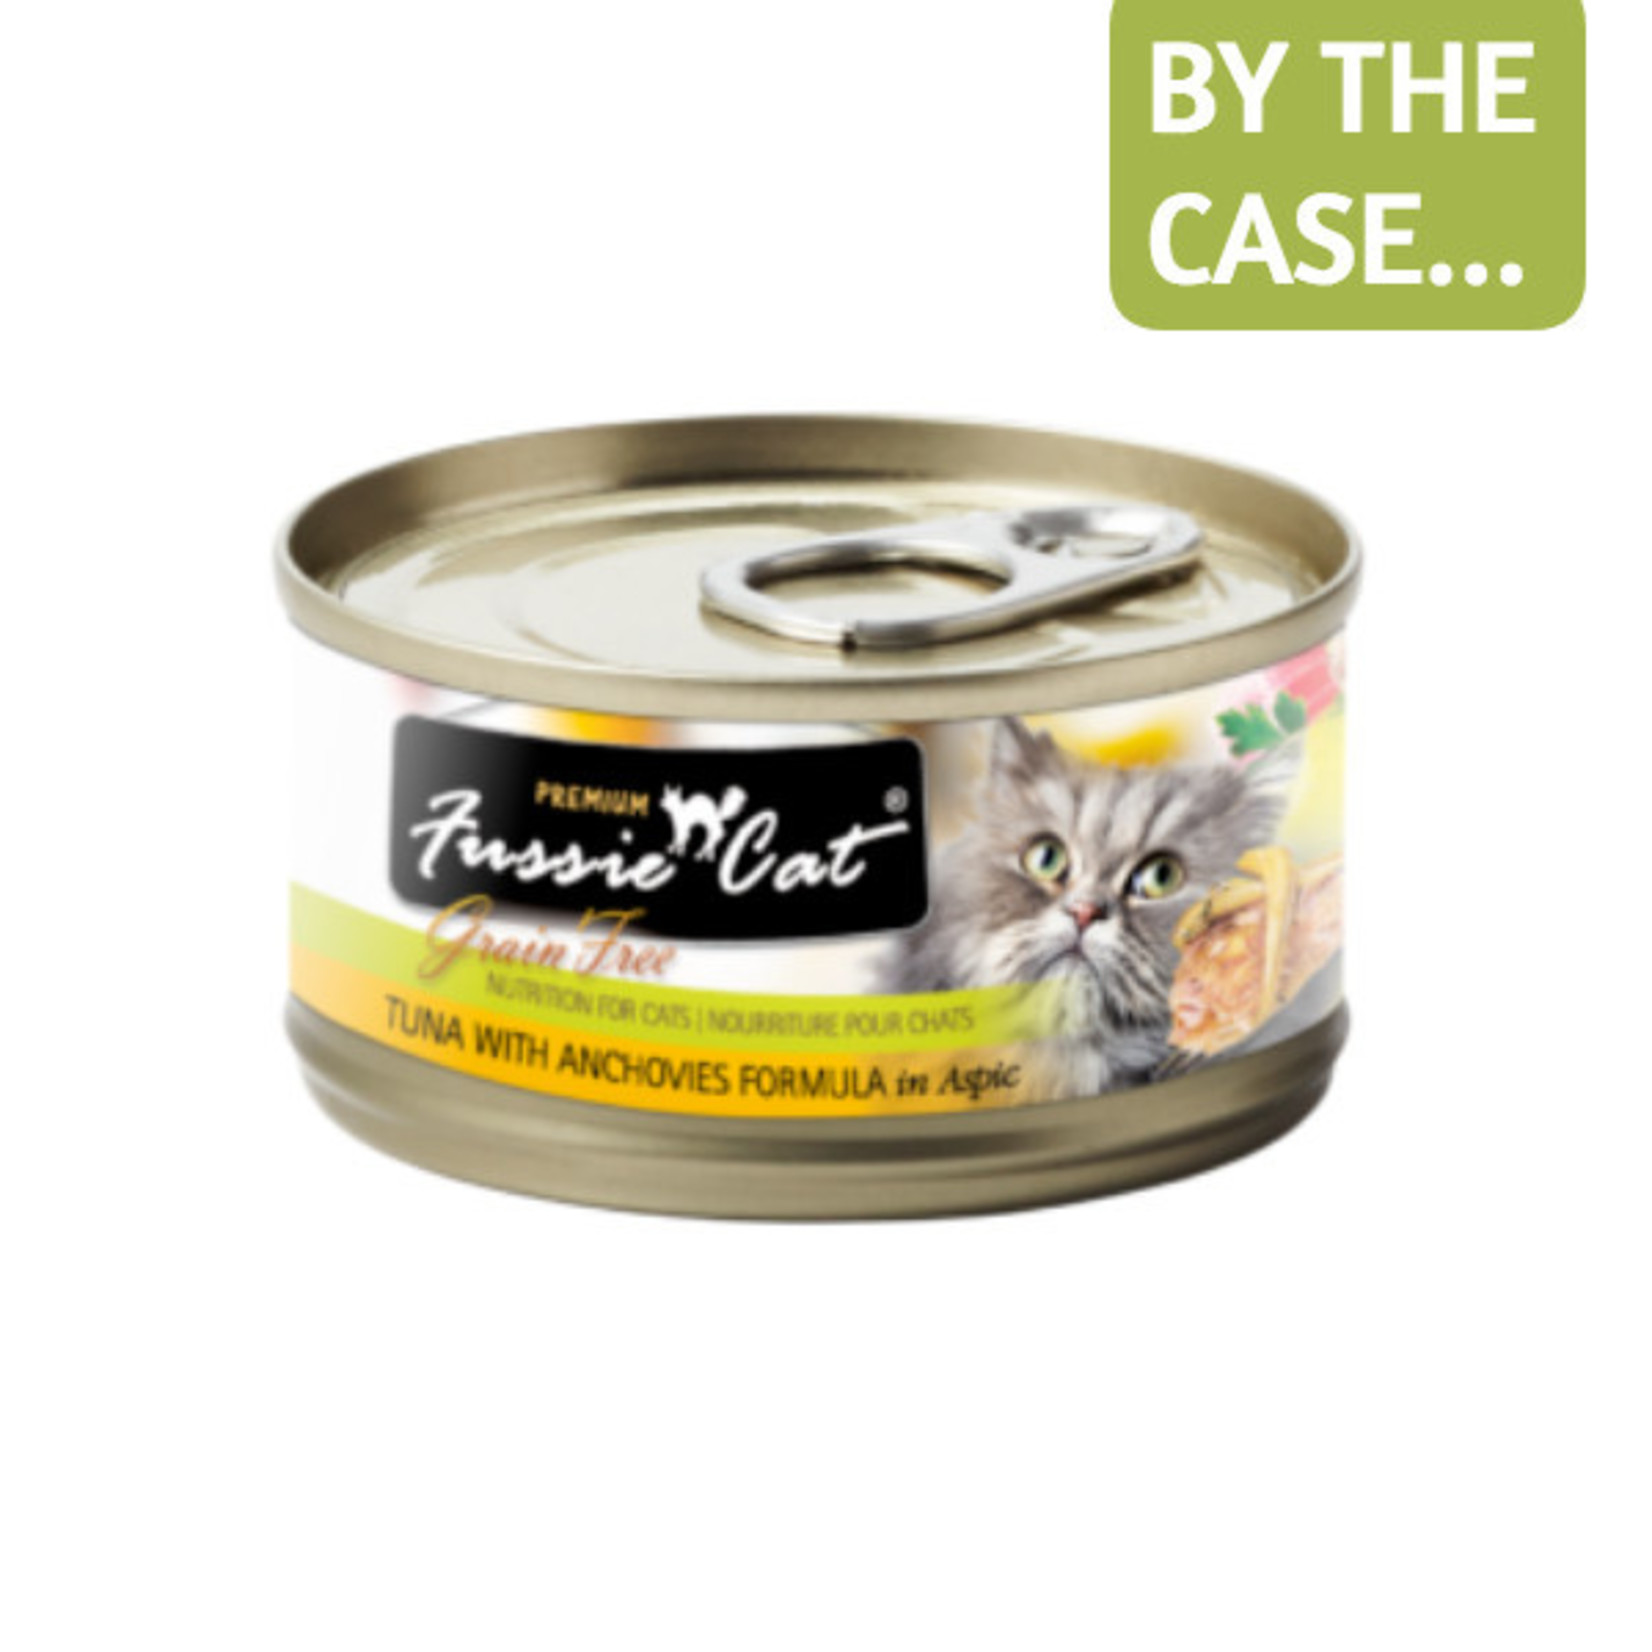 Fussie Cat Fussie Cat Wet Cat Food Tuna with Anchovies Formula in Aspic 2.8oz Can Grain Free